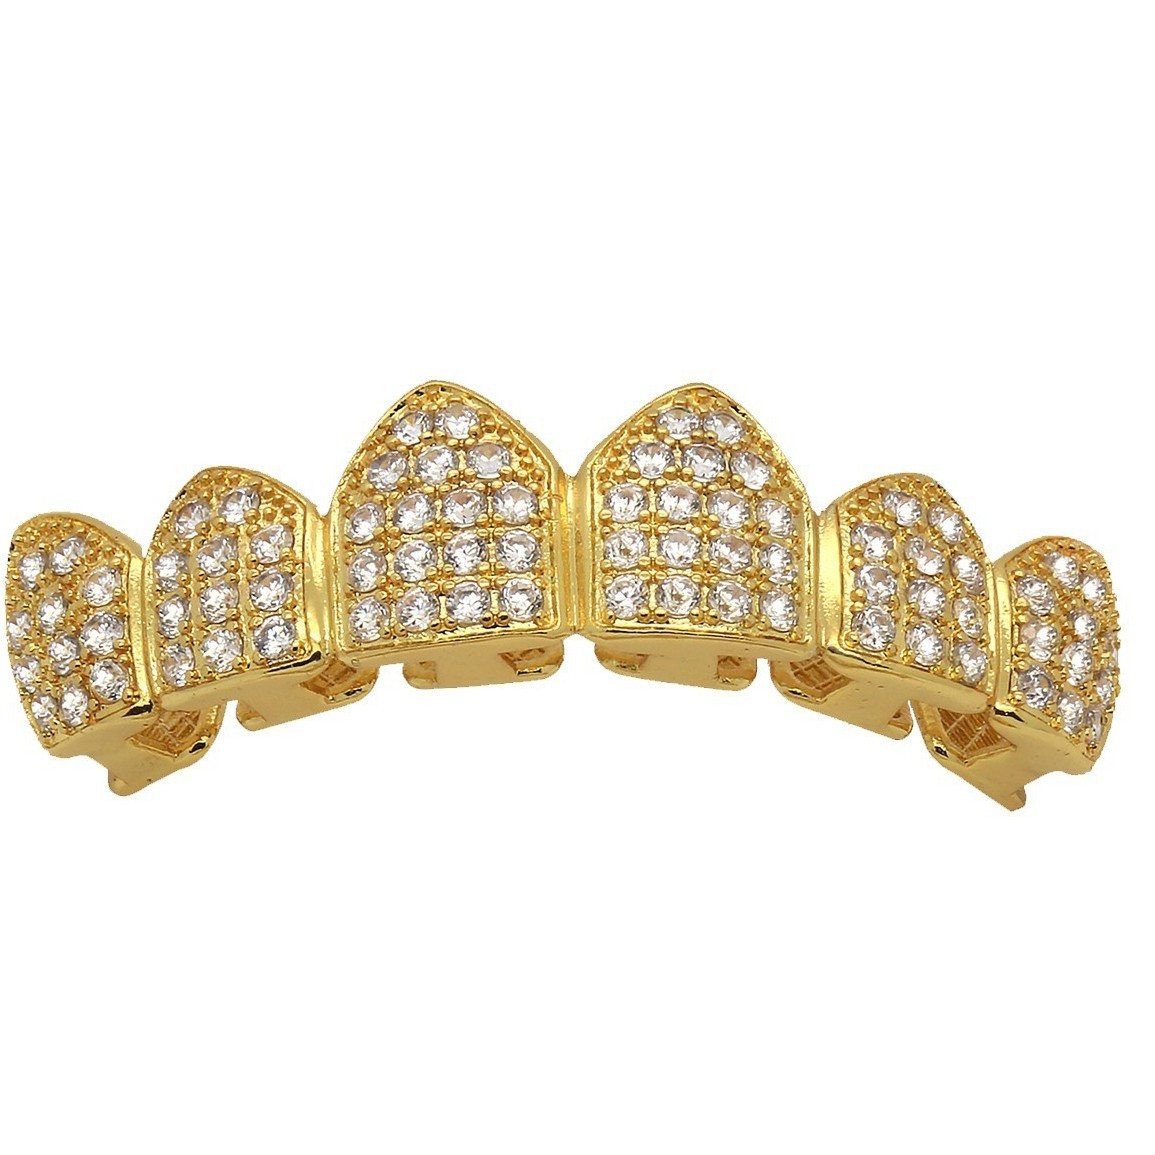 GRILLZ SET GOLD CZ FULLY ICED OUT